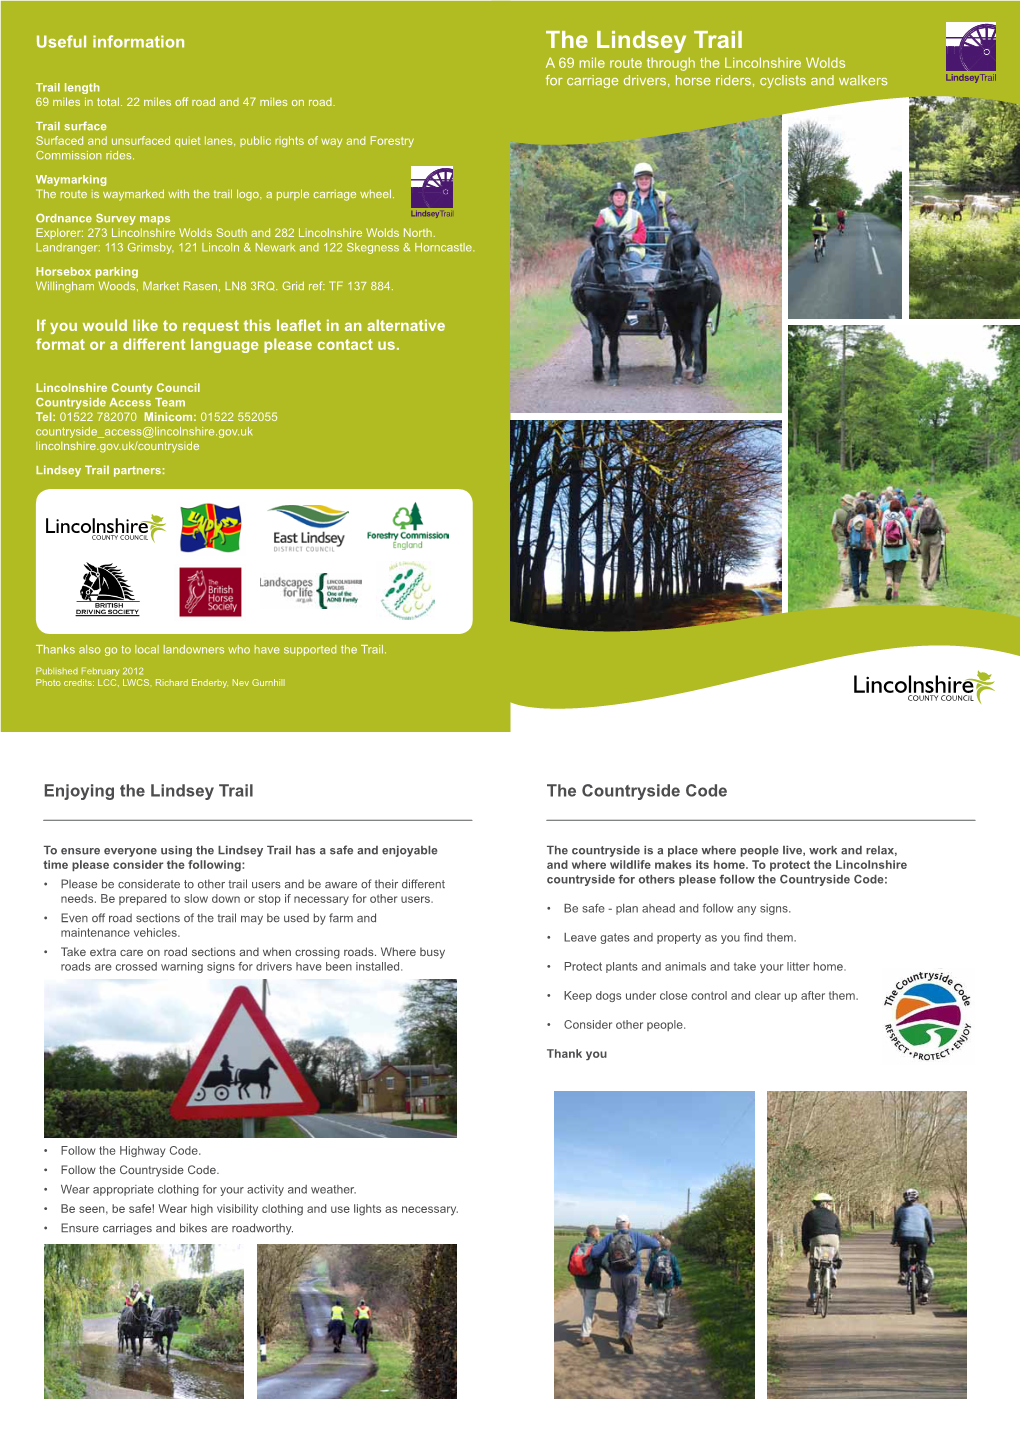 The Lindsey Trail a 69 Mile Route Through the Lincolnshire Wolds for Carriage Drivers, Horse Riders, Cyclists and Walkers Lindseytrail Trail Length 69 Miles in Total